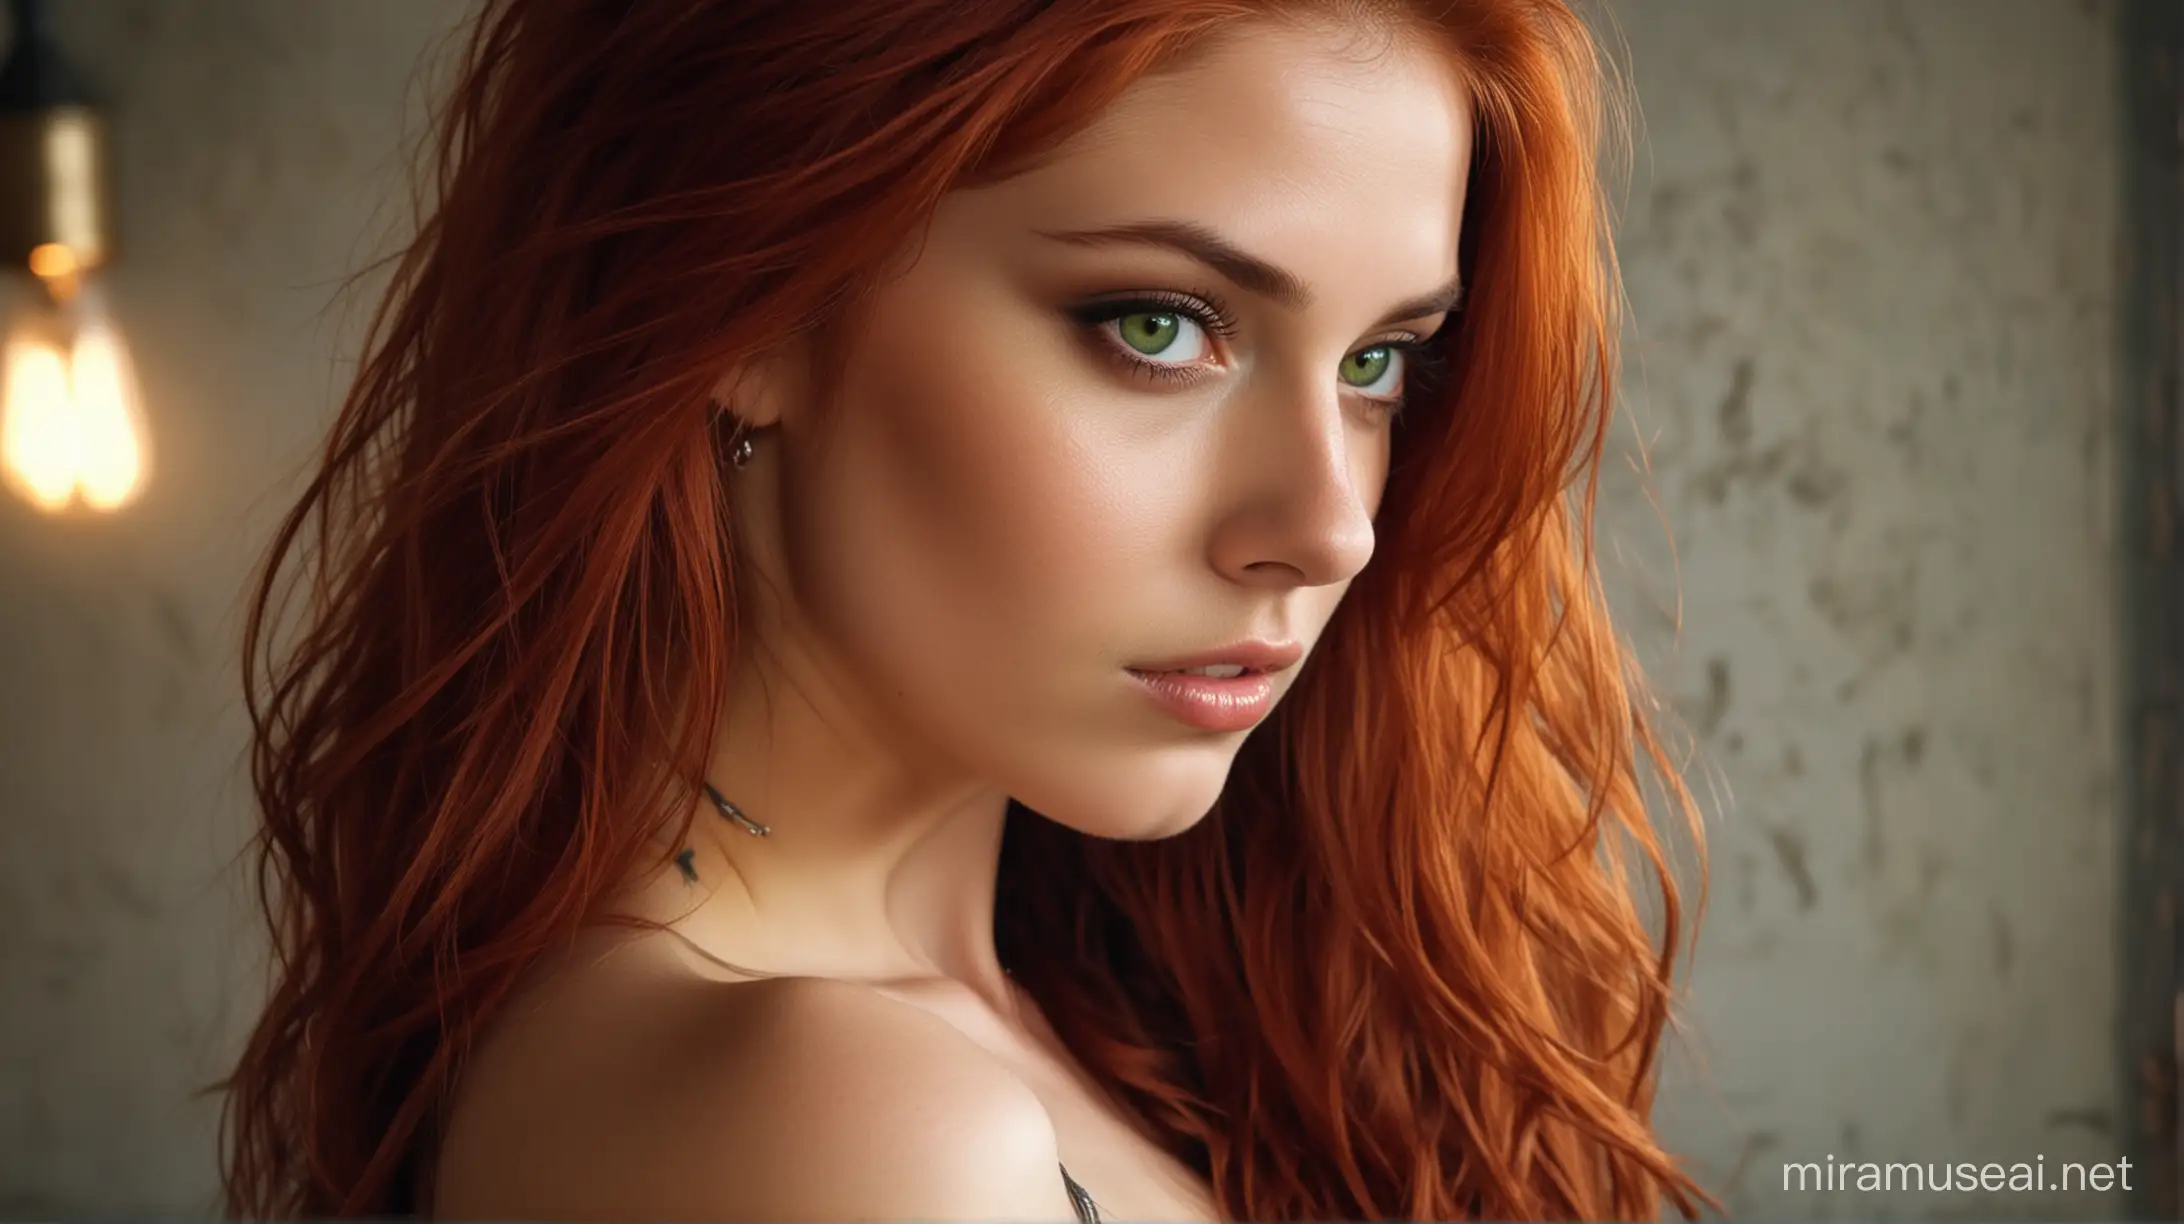 A seductive girl with fiery red hair and piercing green eyes, lost in the throes of passion with her lover in a dimly lit room.